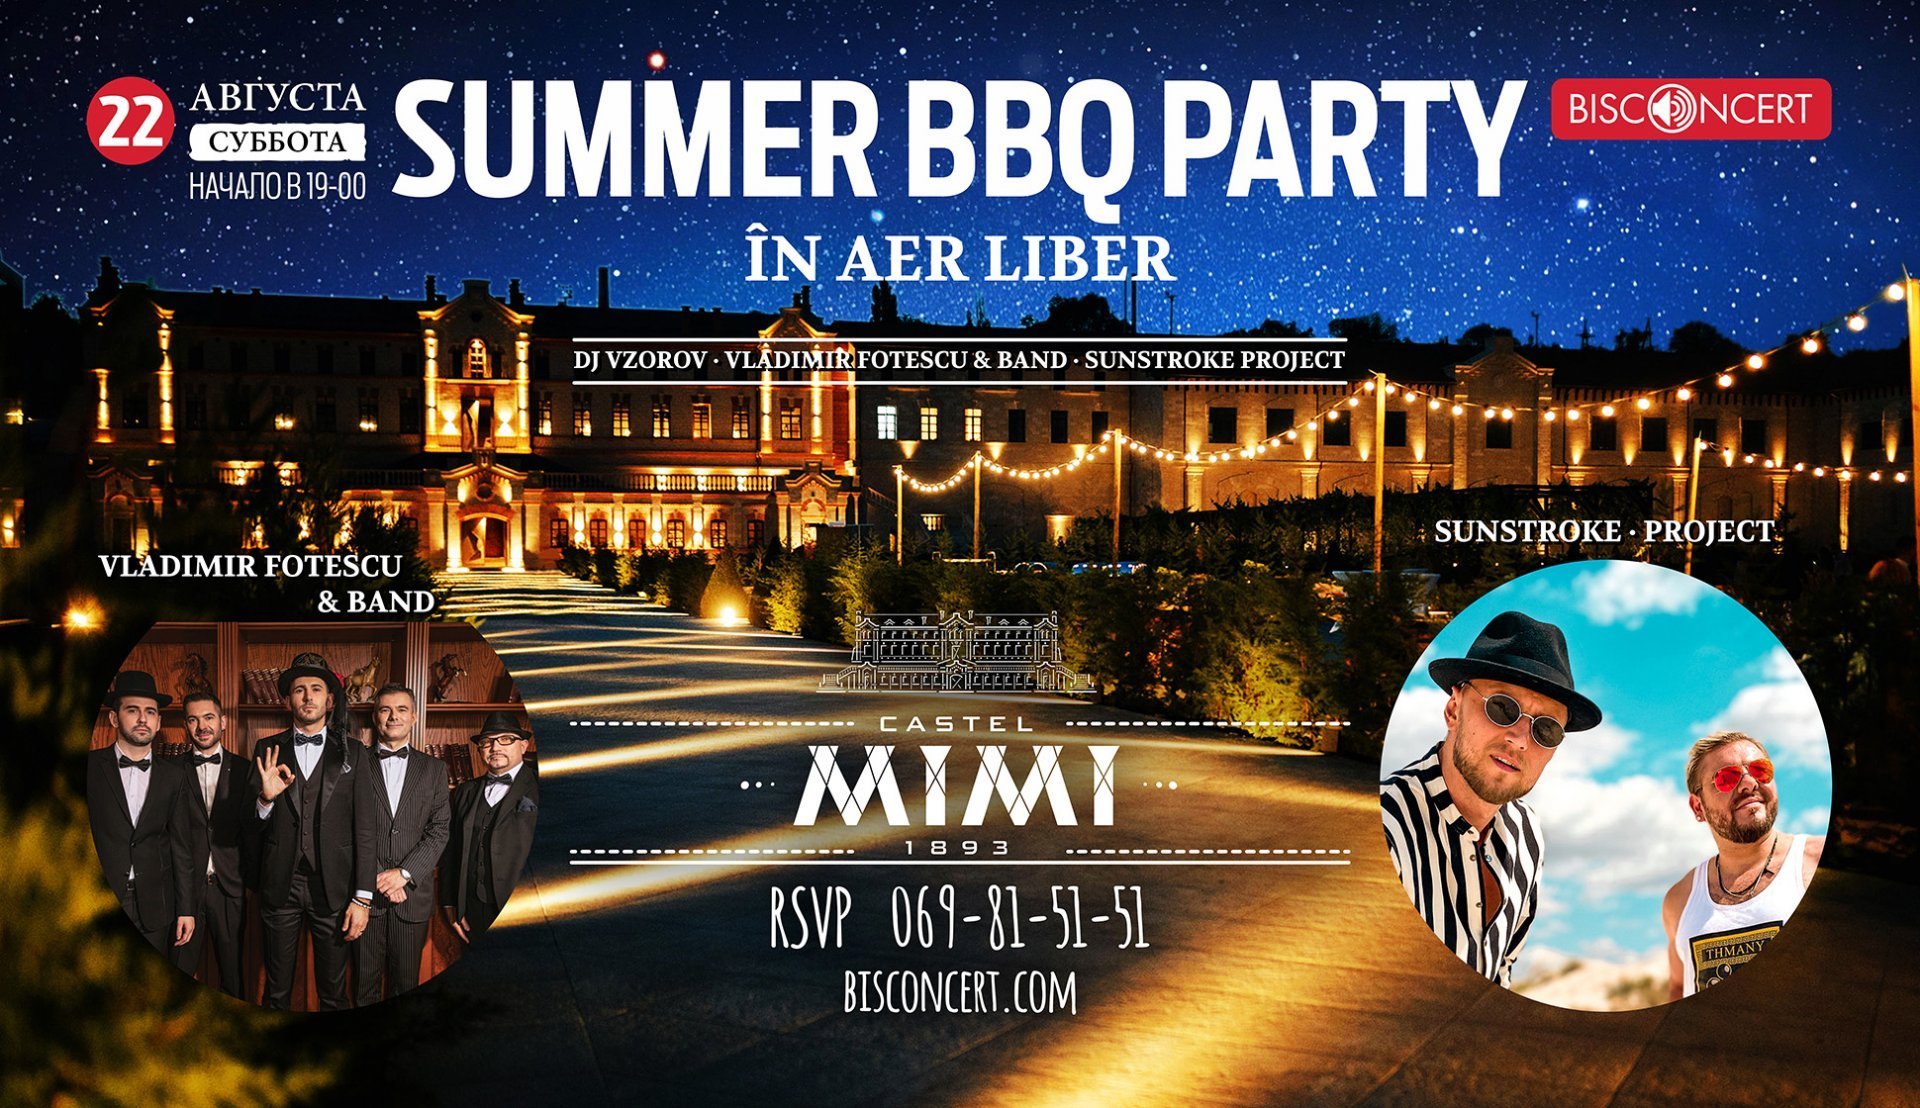 SUMMER BARBEQUE PARTY I